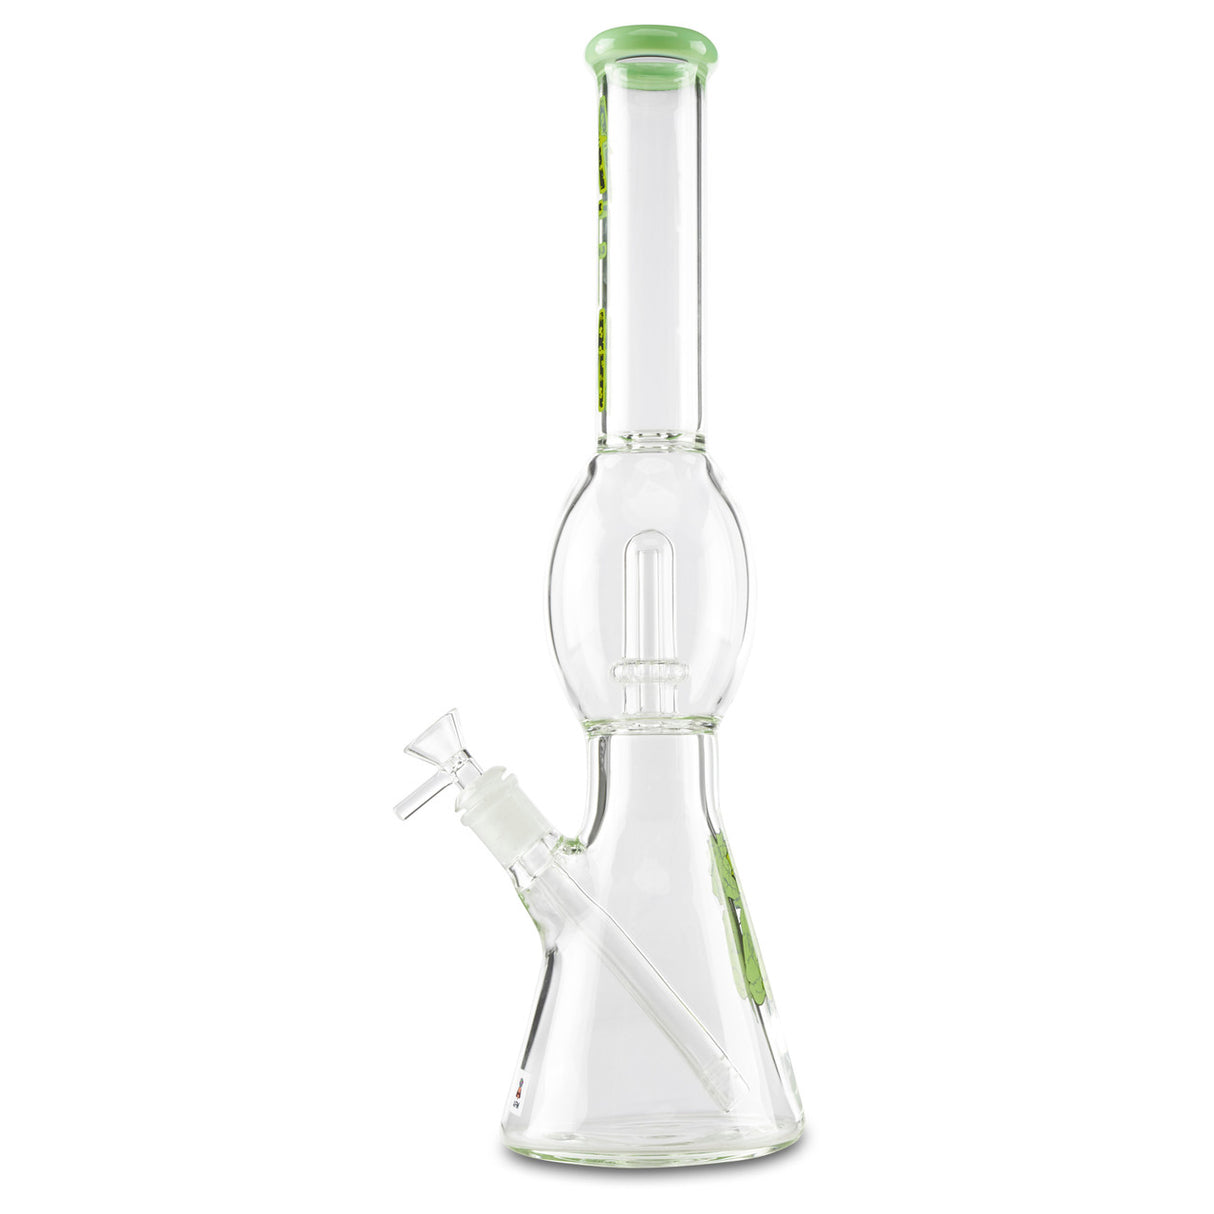 afm ufo perc dry herb glass bong with slide and downstem